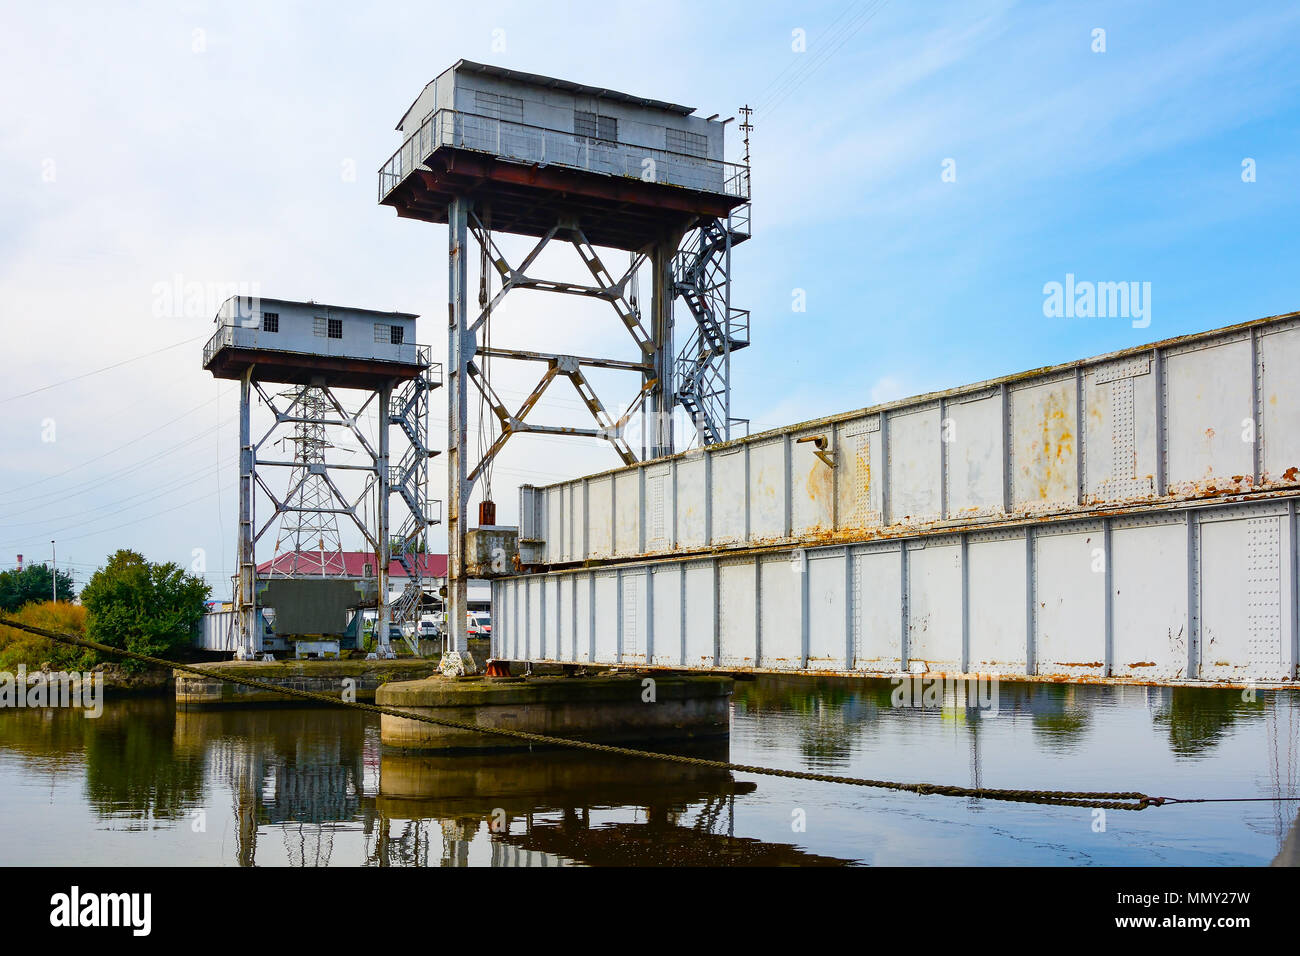 Kaliningrad, old decommissioned railway lift bridge over the river Pregel in the Commercial port area Stock Photo